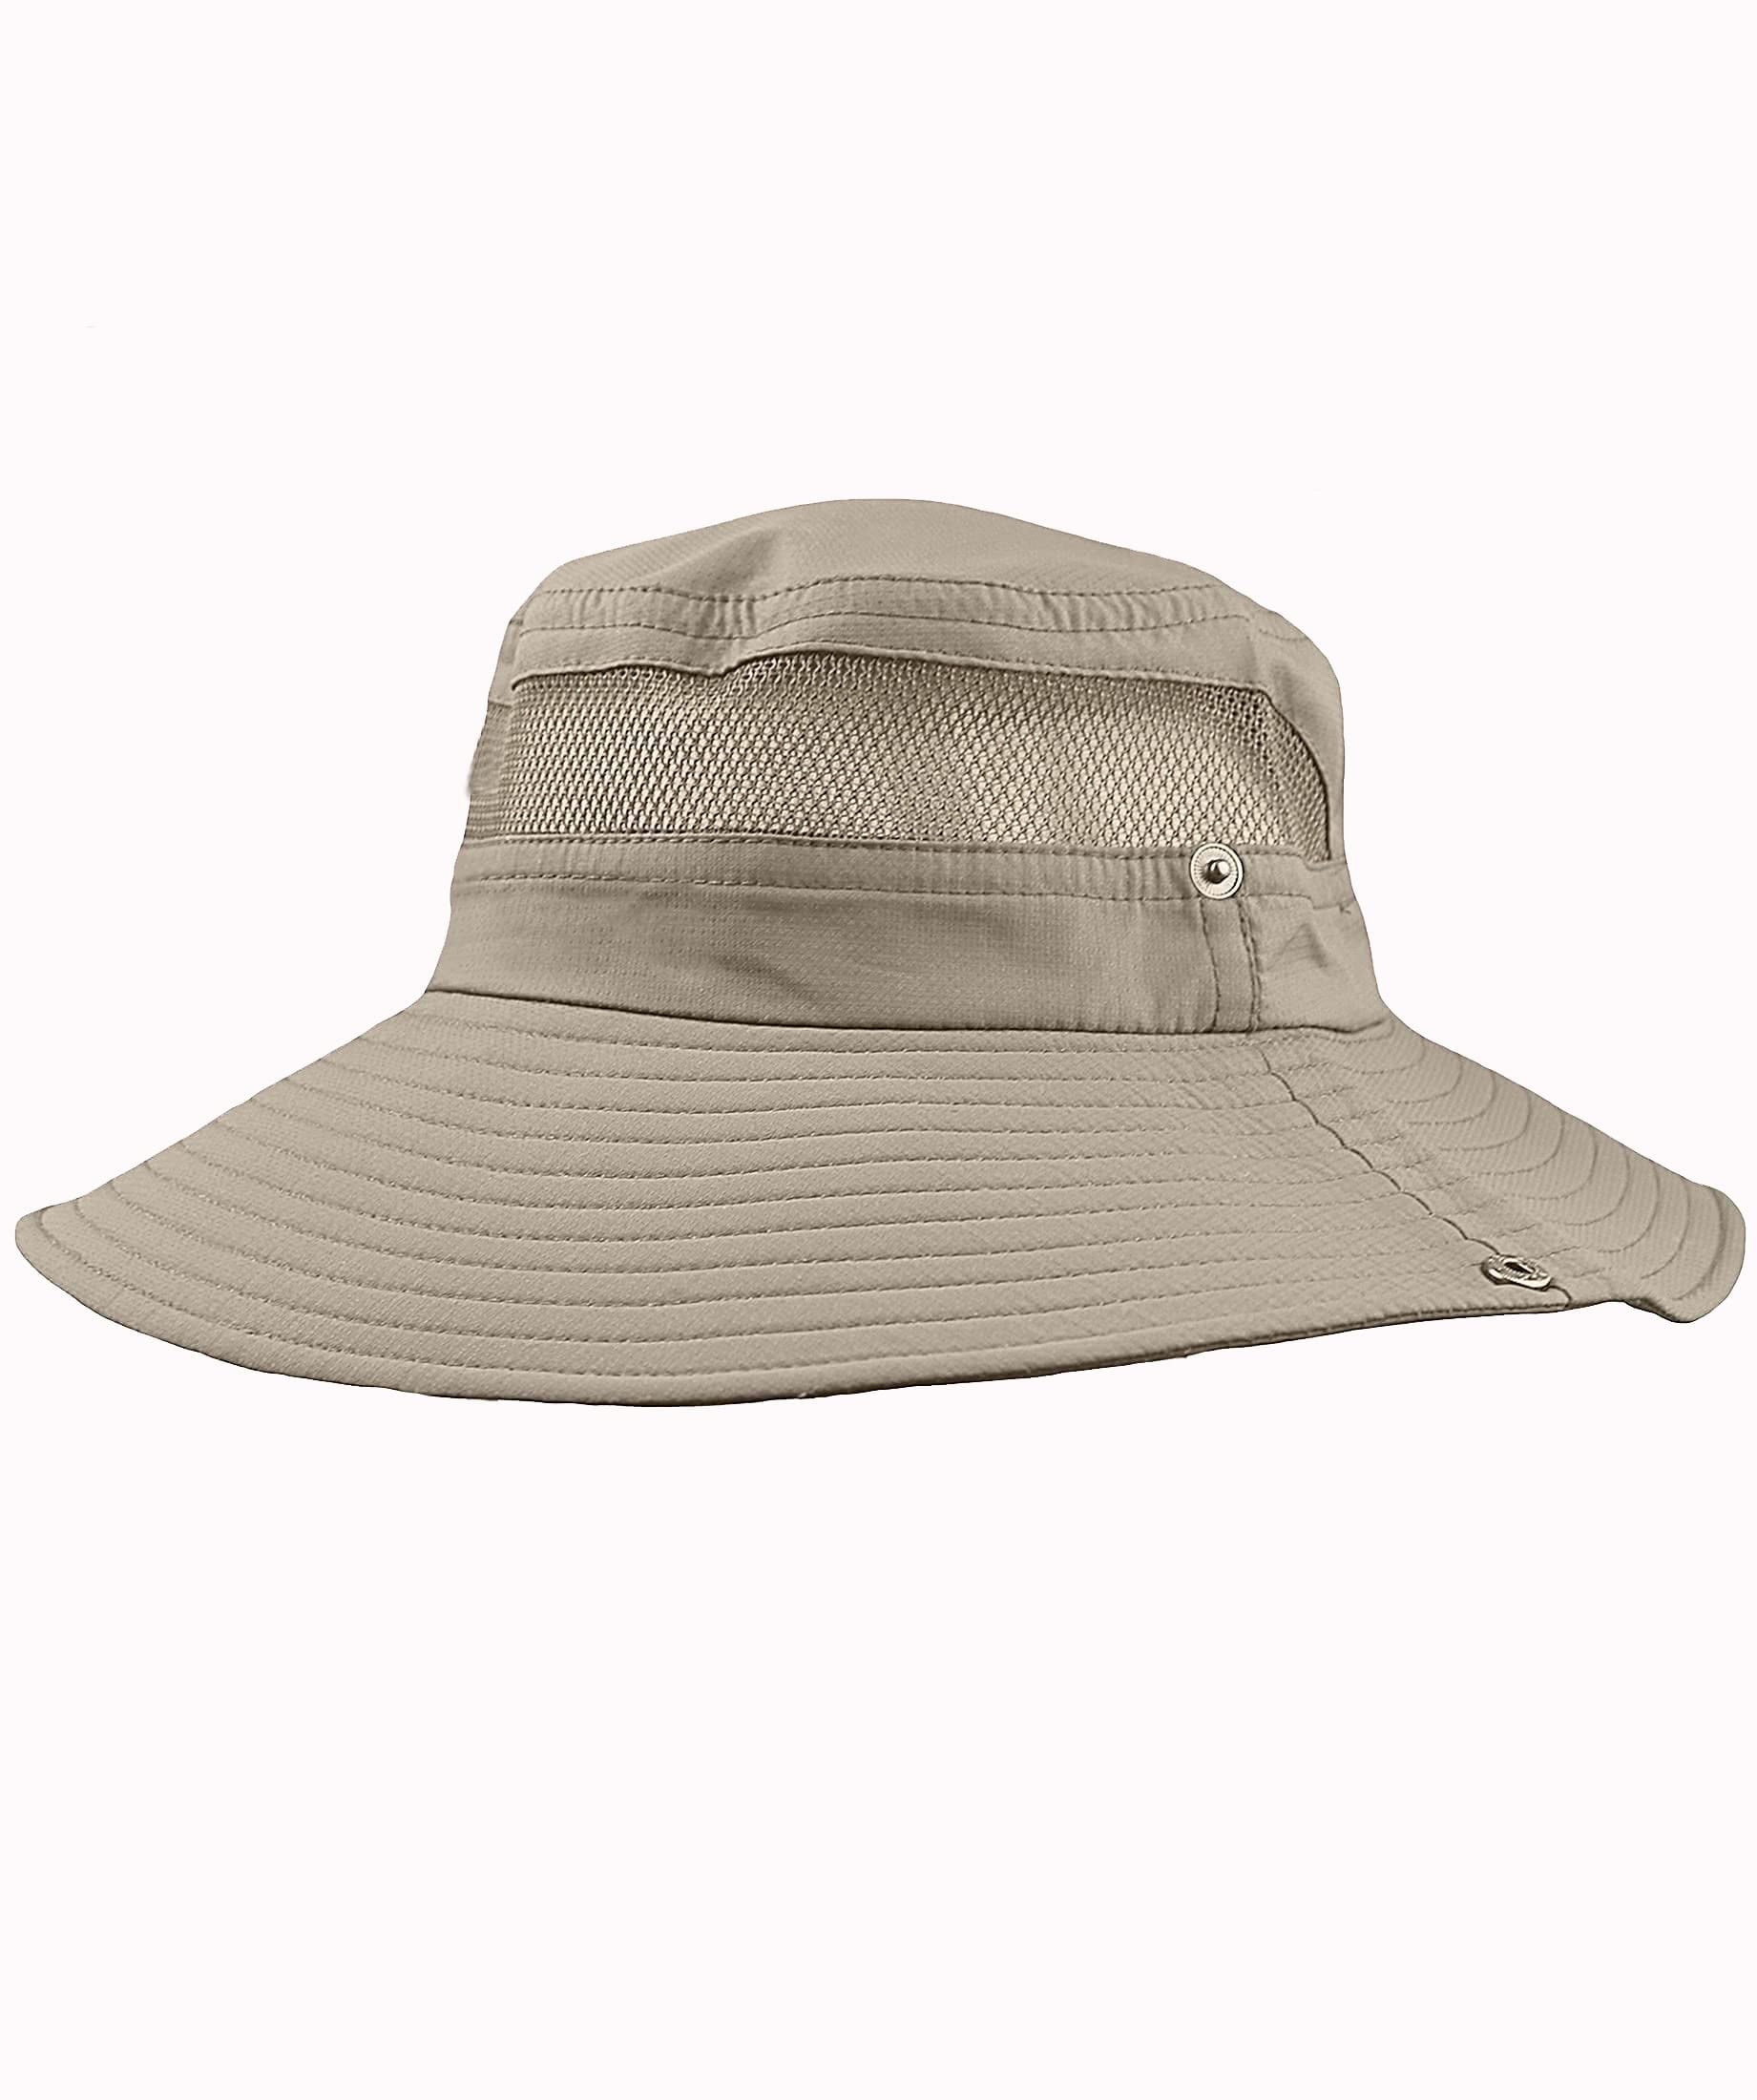 GearTOP Fishing Hat UPF 50+ Wide Brim Sun Hat for South Africa | Ubuy